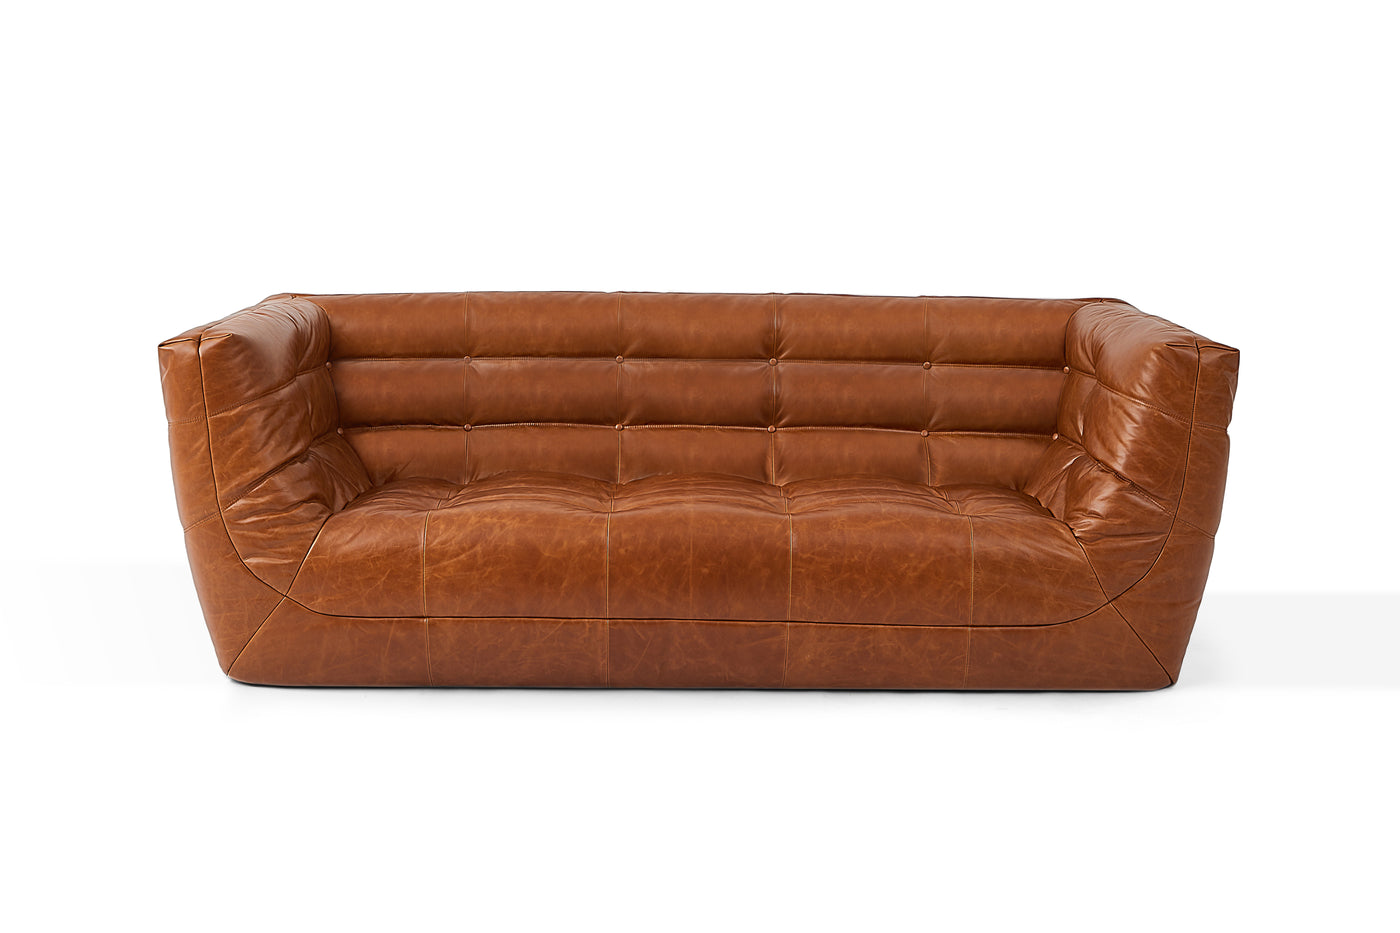 Russo2 Corner sofa in Vintage leather